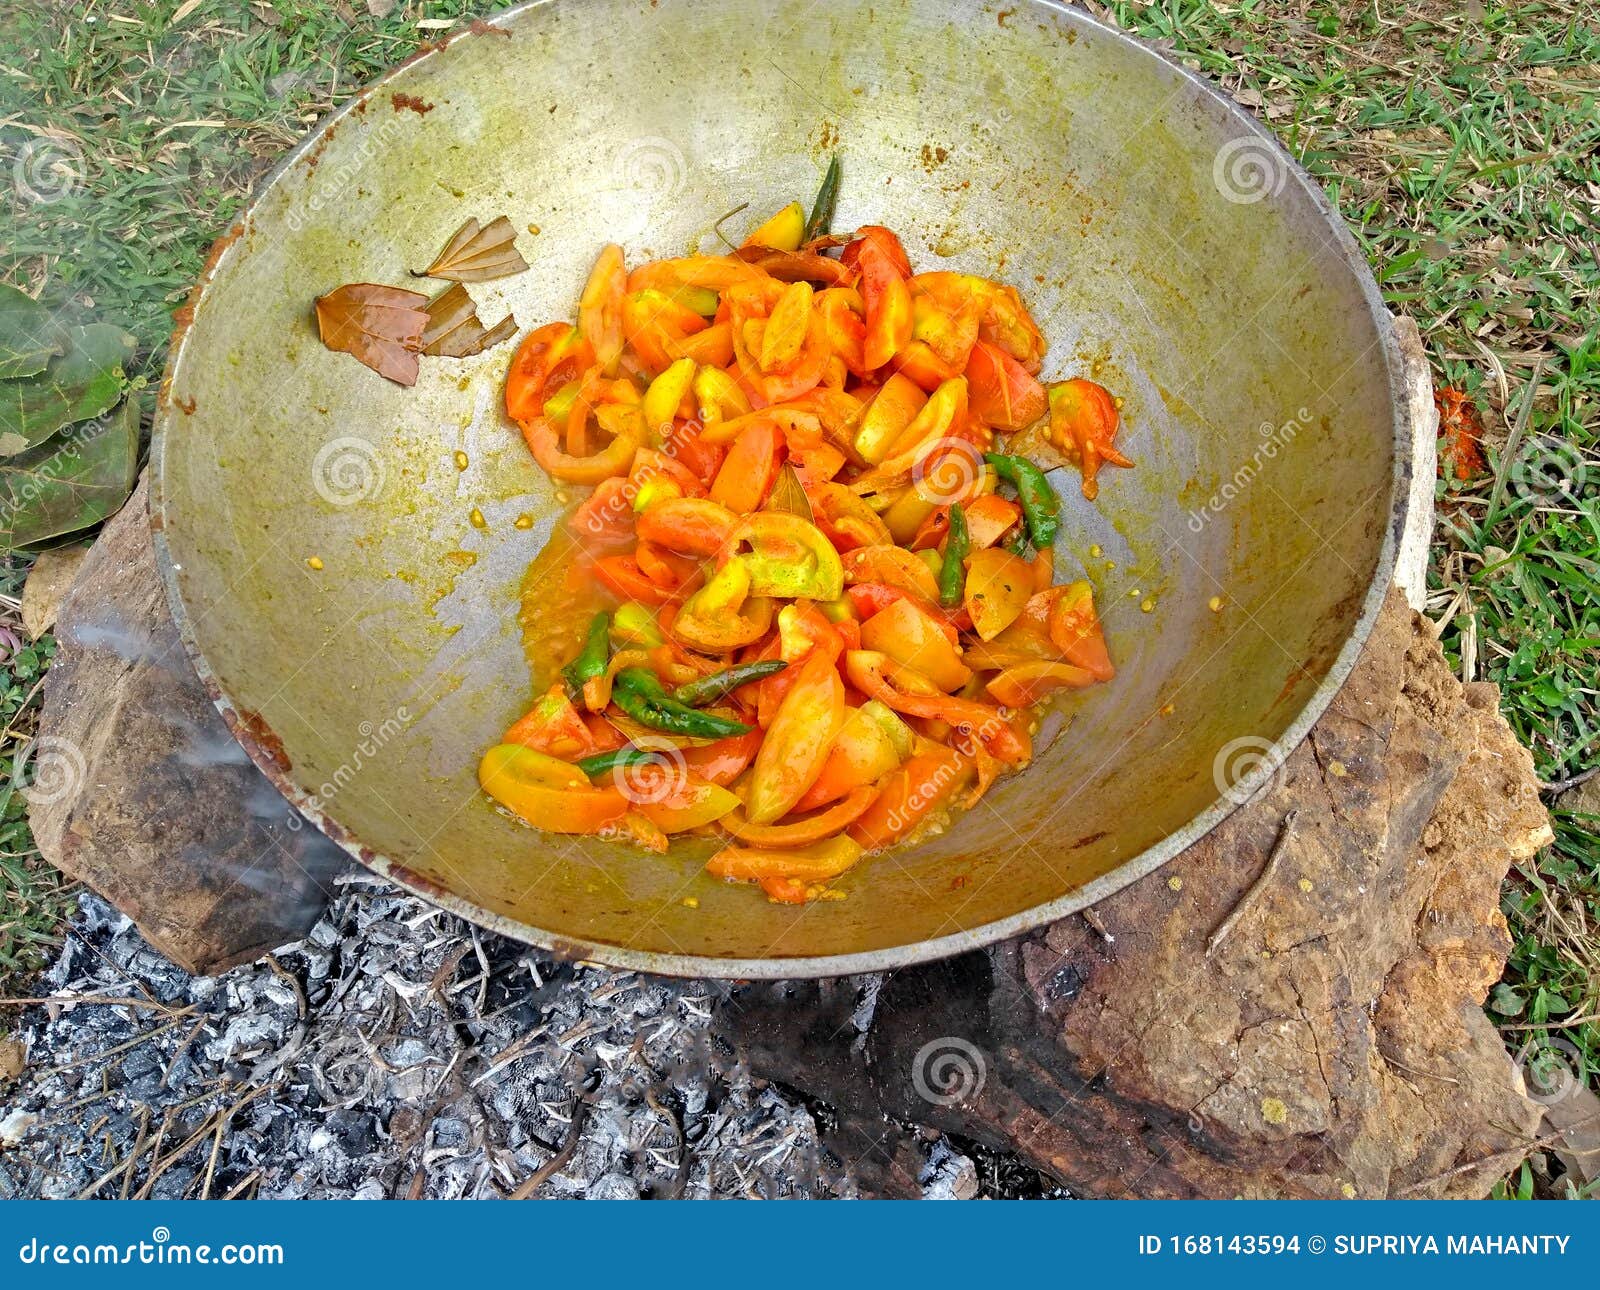 https://thumbs.dreamstime.com/z/cooking-tasty-delicious-indian-sour-hot-tomato-juice-open-field-using-steel-kadai-stone-made-firewood-oven-168143594.jpg